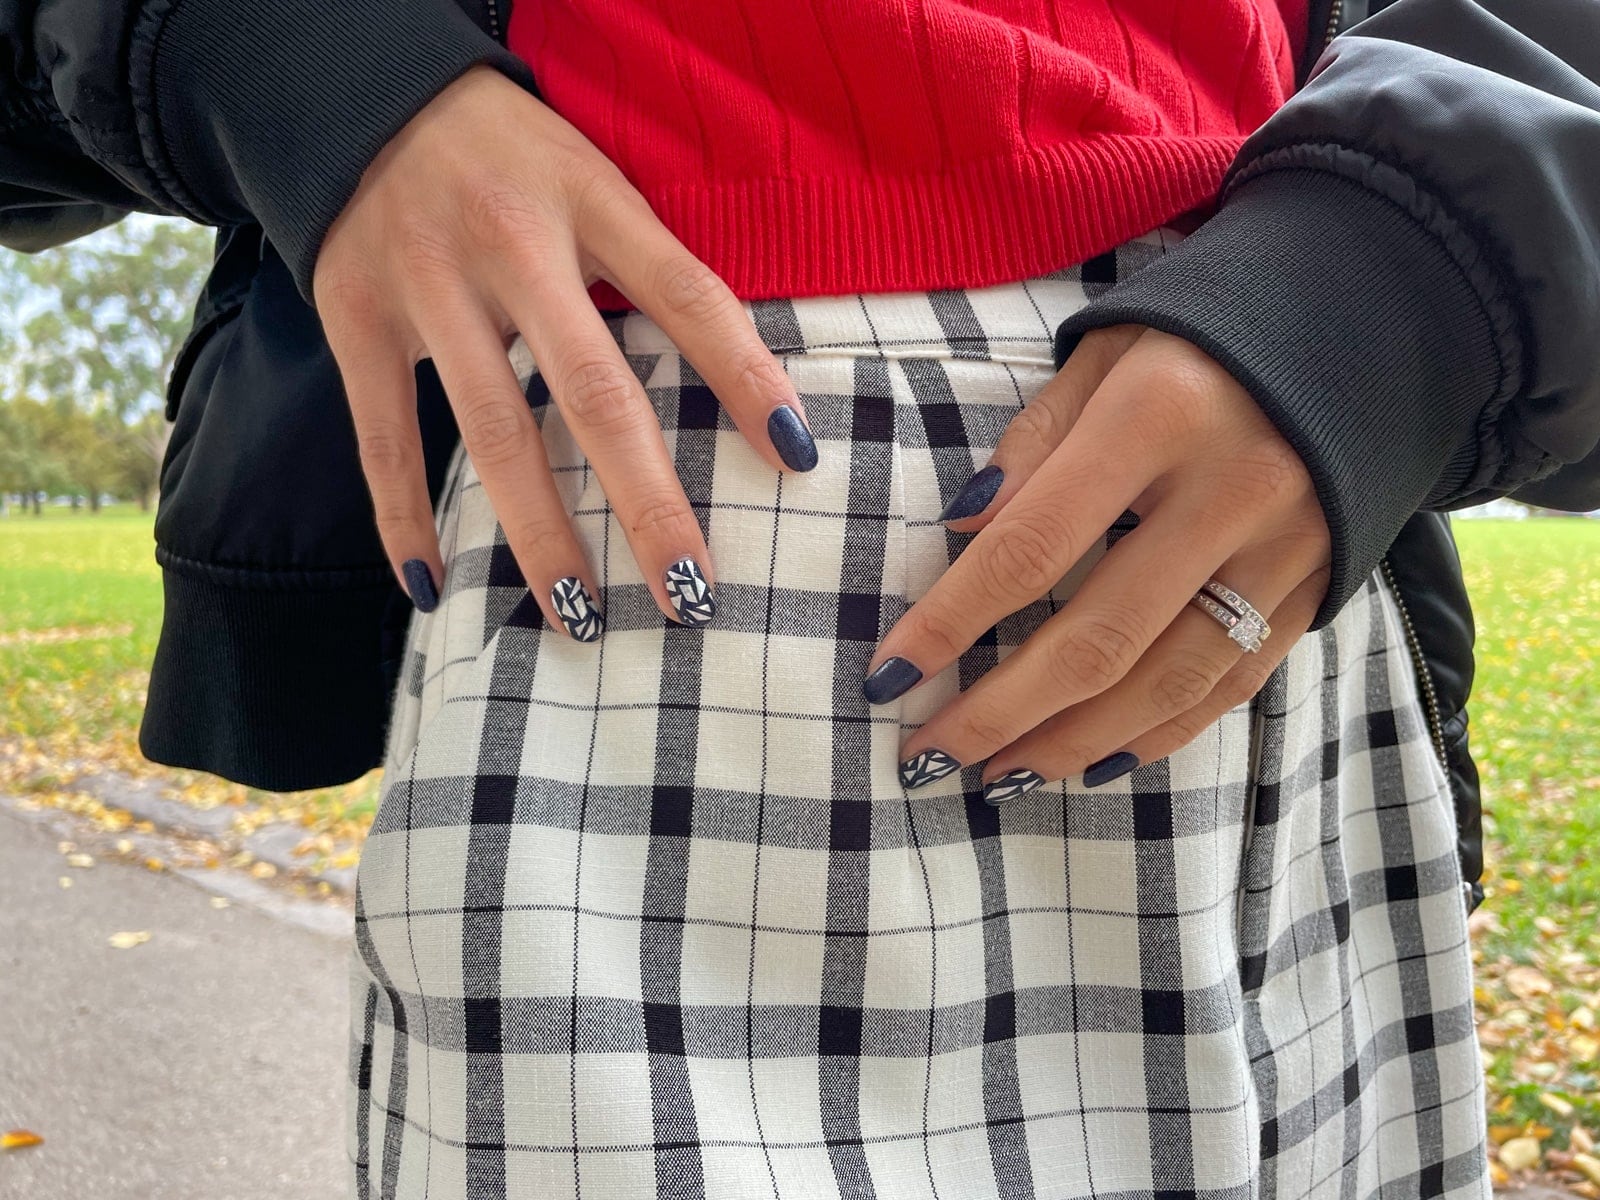 A close-up of a womanâ€™s nail art, which is dark navy and slightly glittery, with some accent nails with silver geometric shapes. In the background is the womanâ€™s black-and-white checkered shorts, and black lace-up boots.